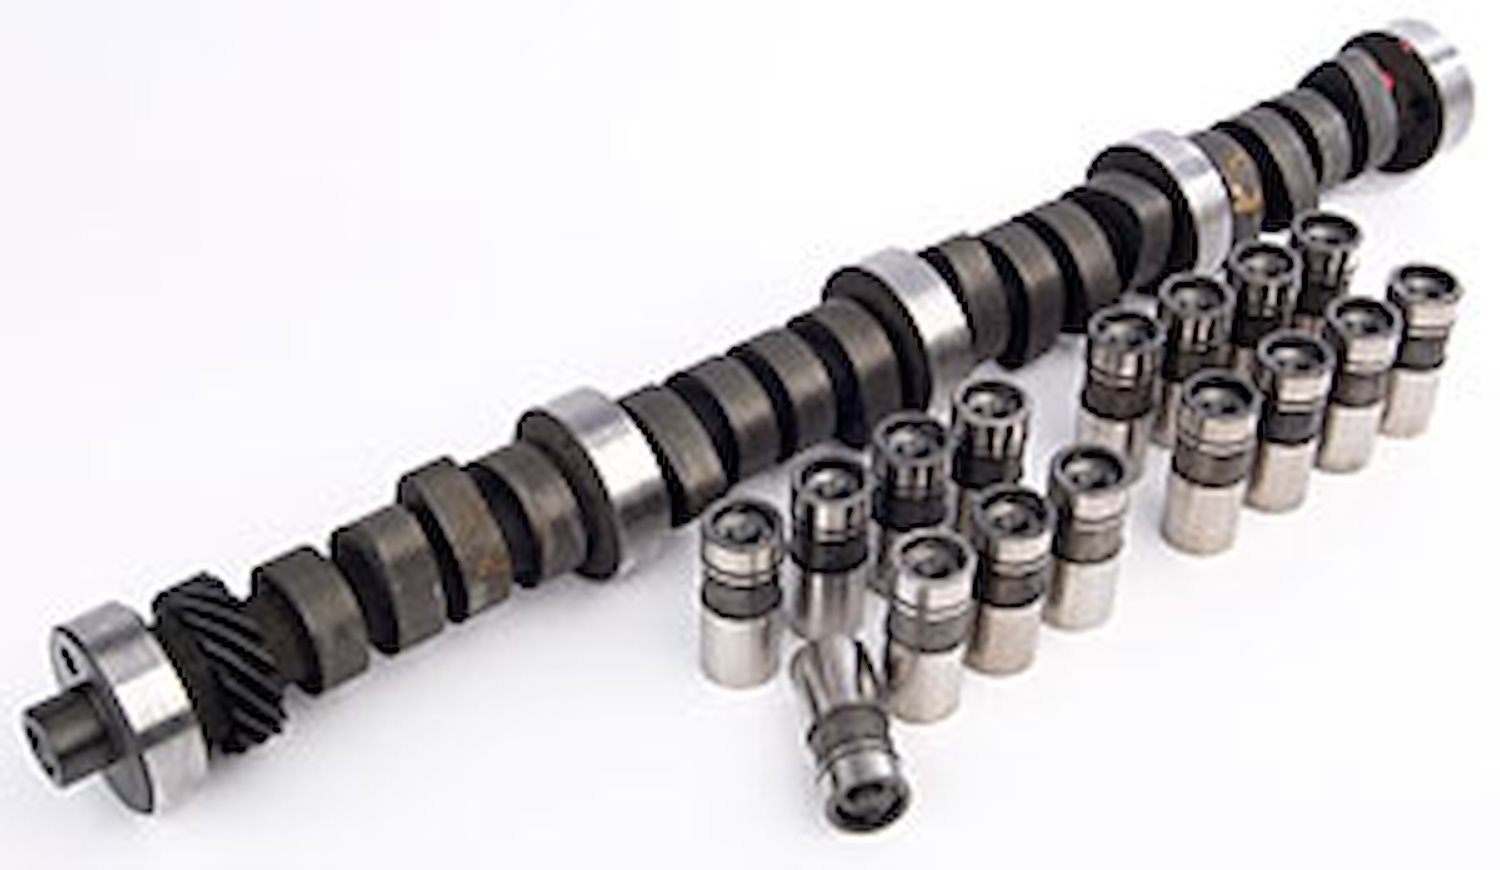 Hydraulic Flat Tappet Camshaft & Lifters for 1958-1978 Chrysler 361-440 w/ 1-Bolt Timing Set